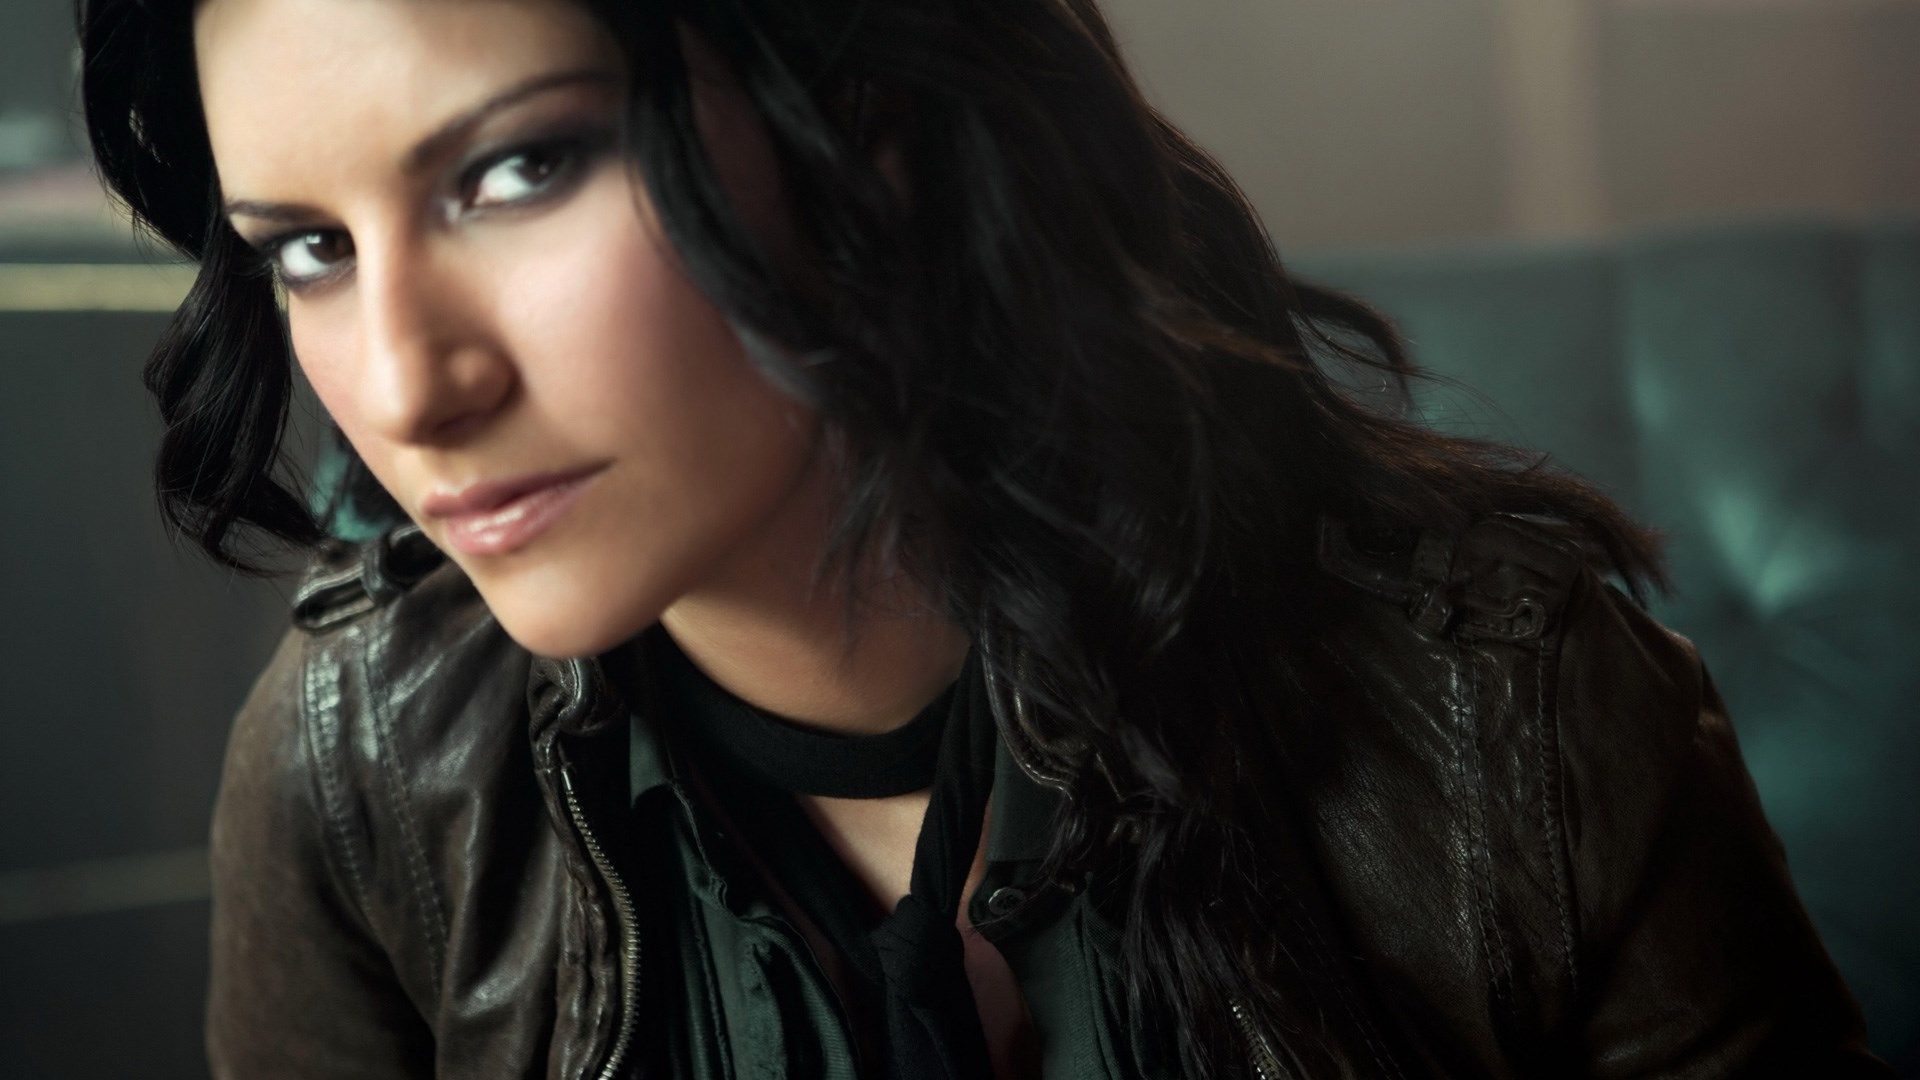 Laura Pausini | Known people - famous people news and biographies